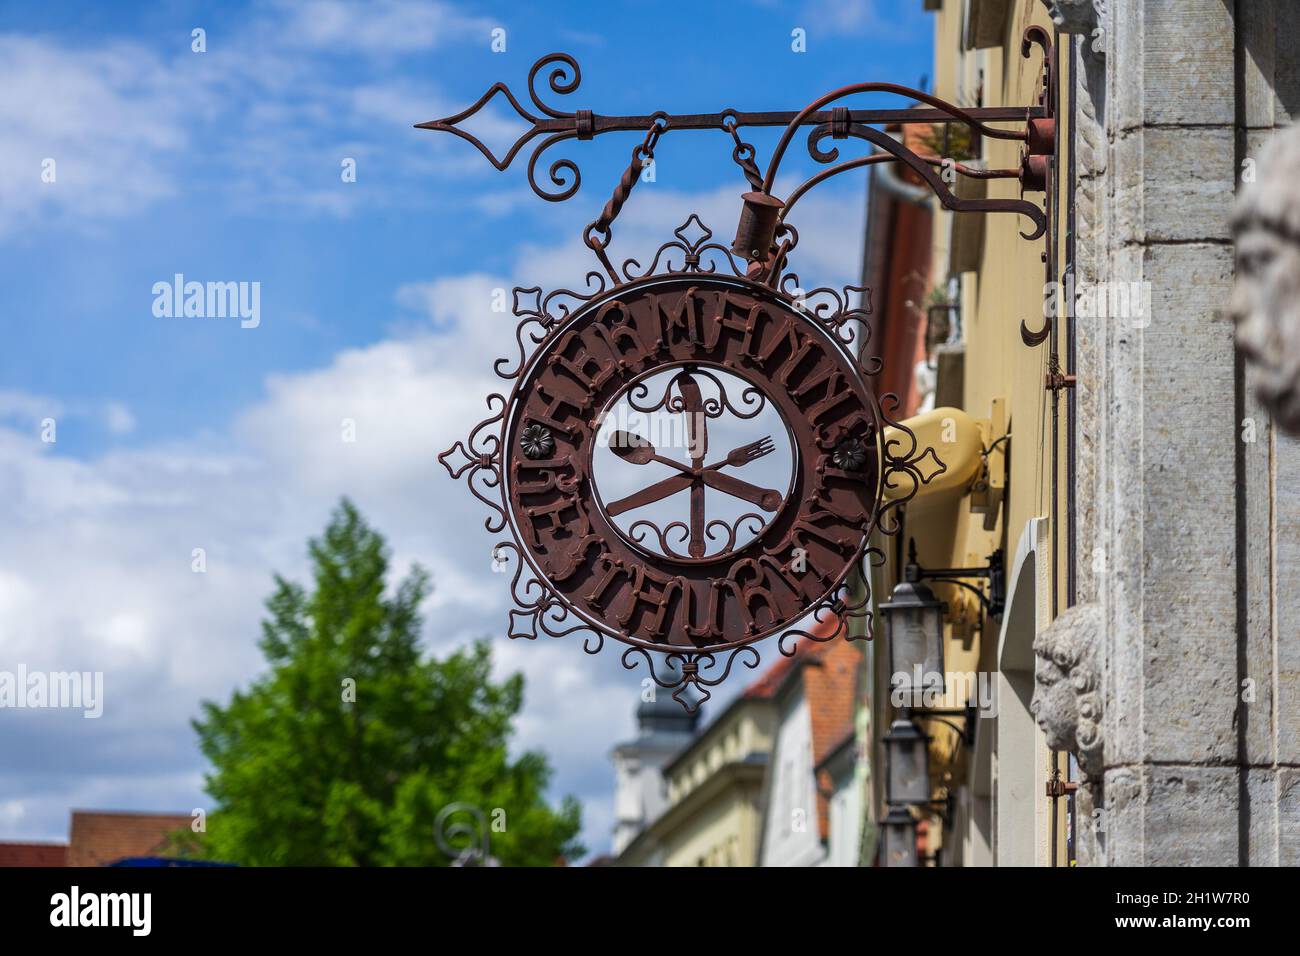 JUETERBOG, GERMANY - MAY 23, 2021: Beautiful wrought iron sign 'Hermanns Restaurant' in old town. Juterbog is a historic town in north-eastern Germany Stock Photo